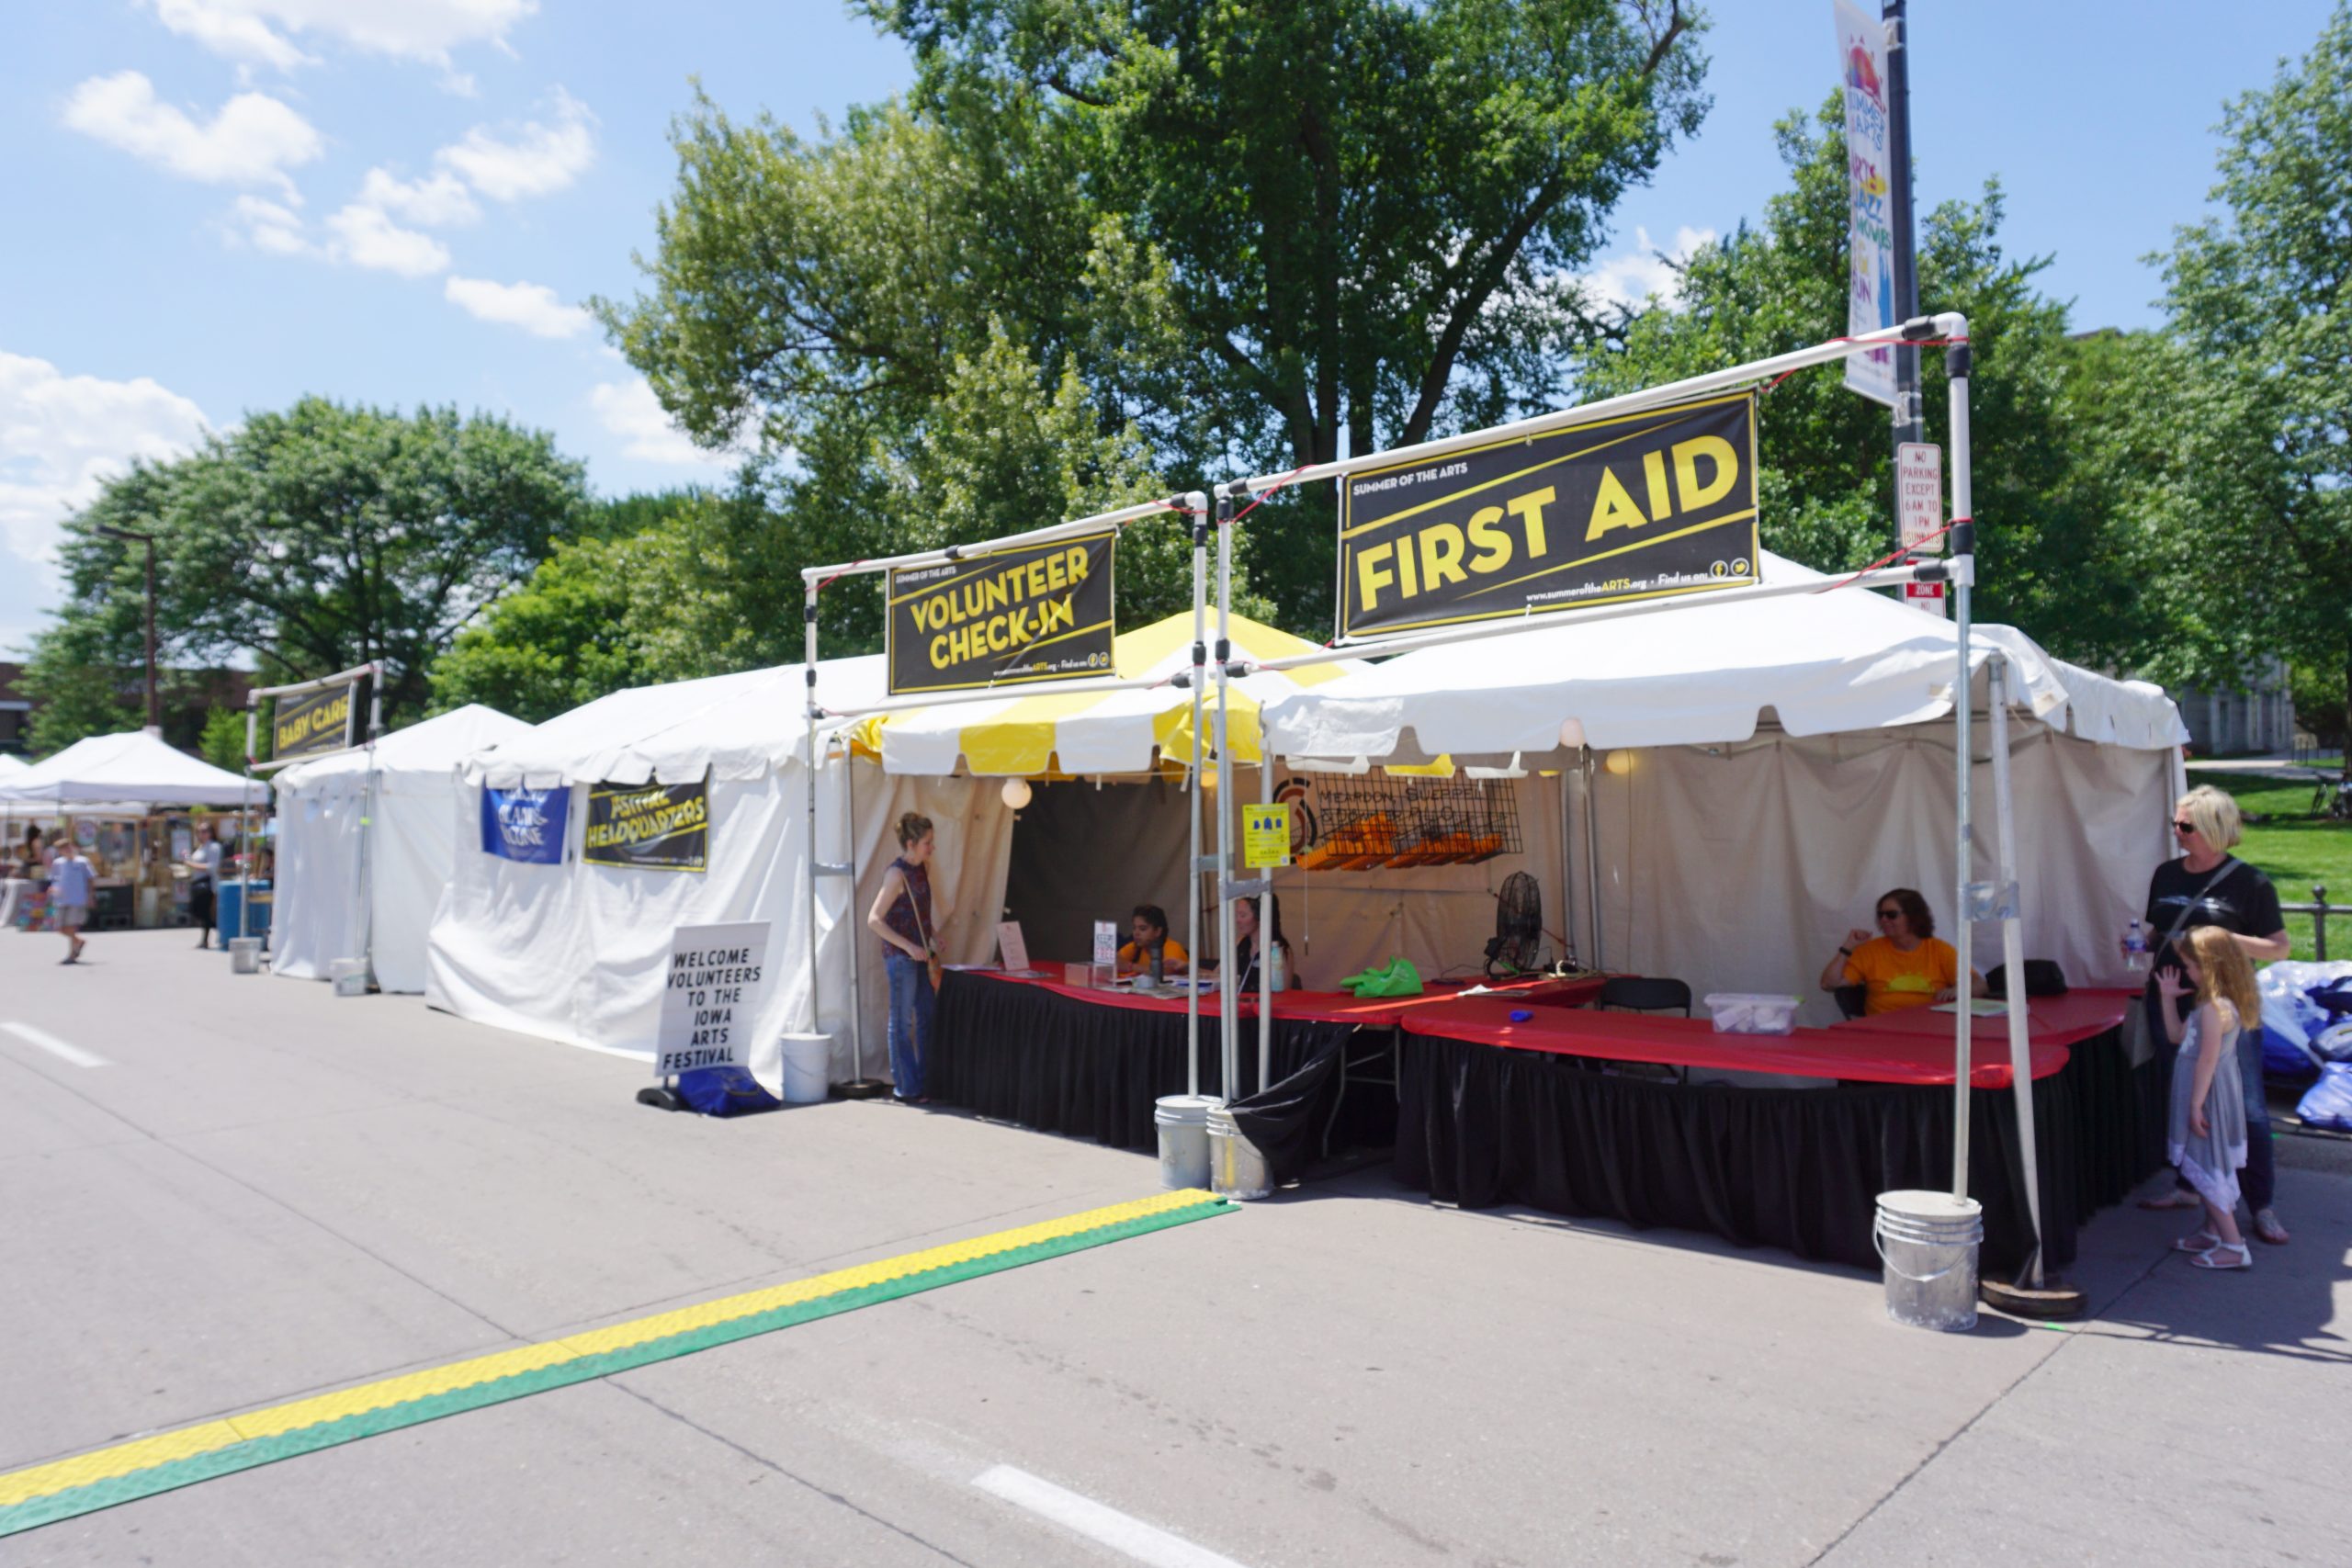 First Aid tent and Volunteer Check-in tent at Summer of the Arts